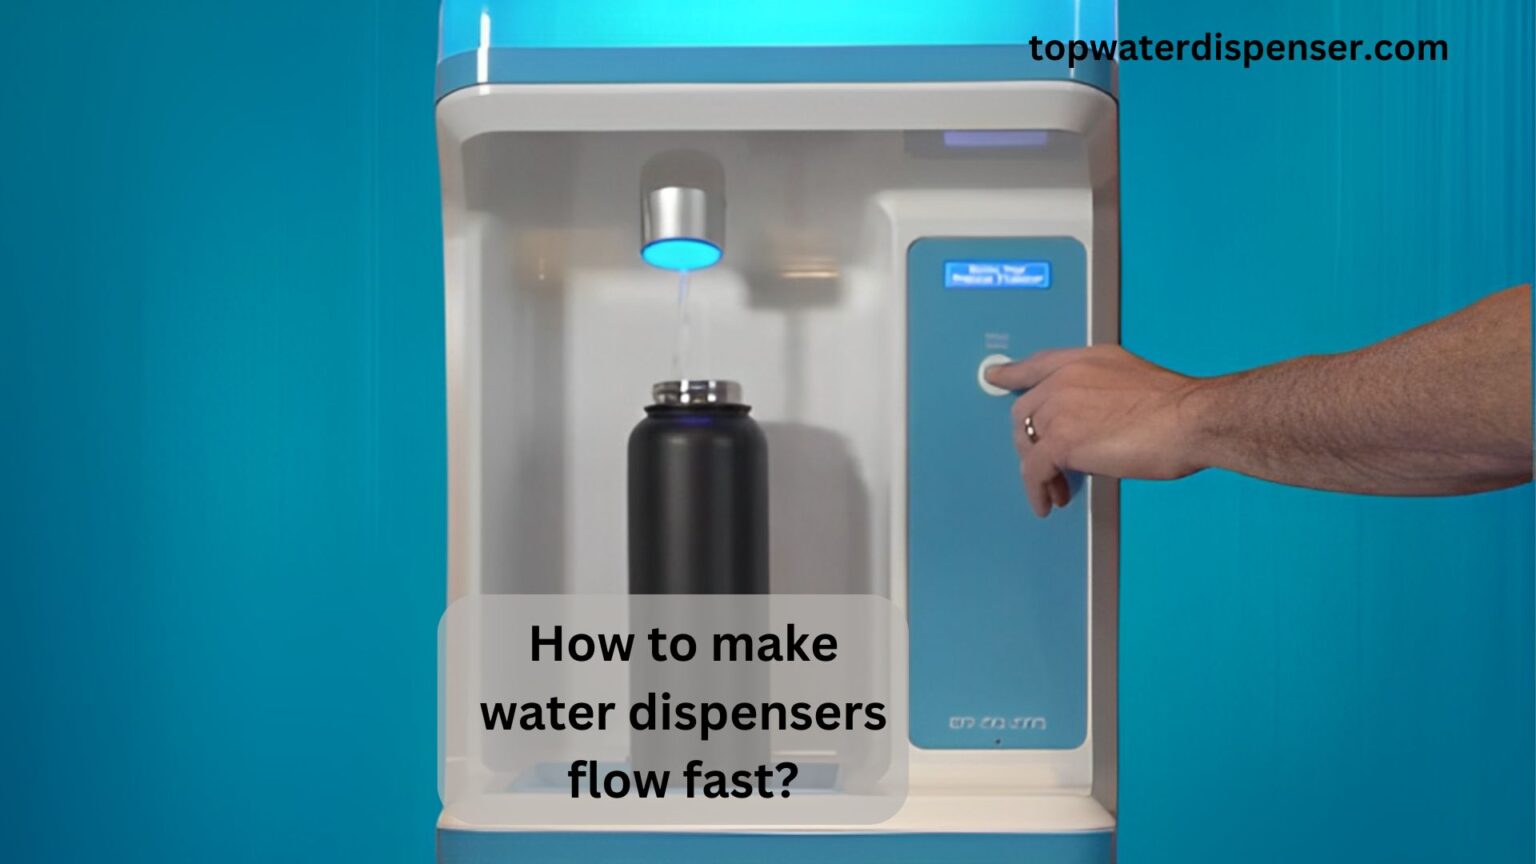 How to make water dispensers flow fast?